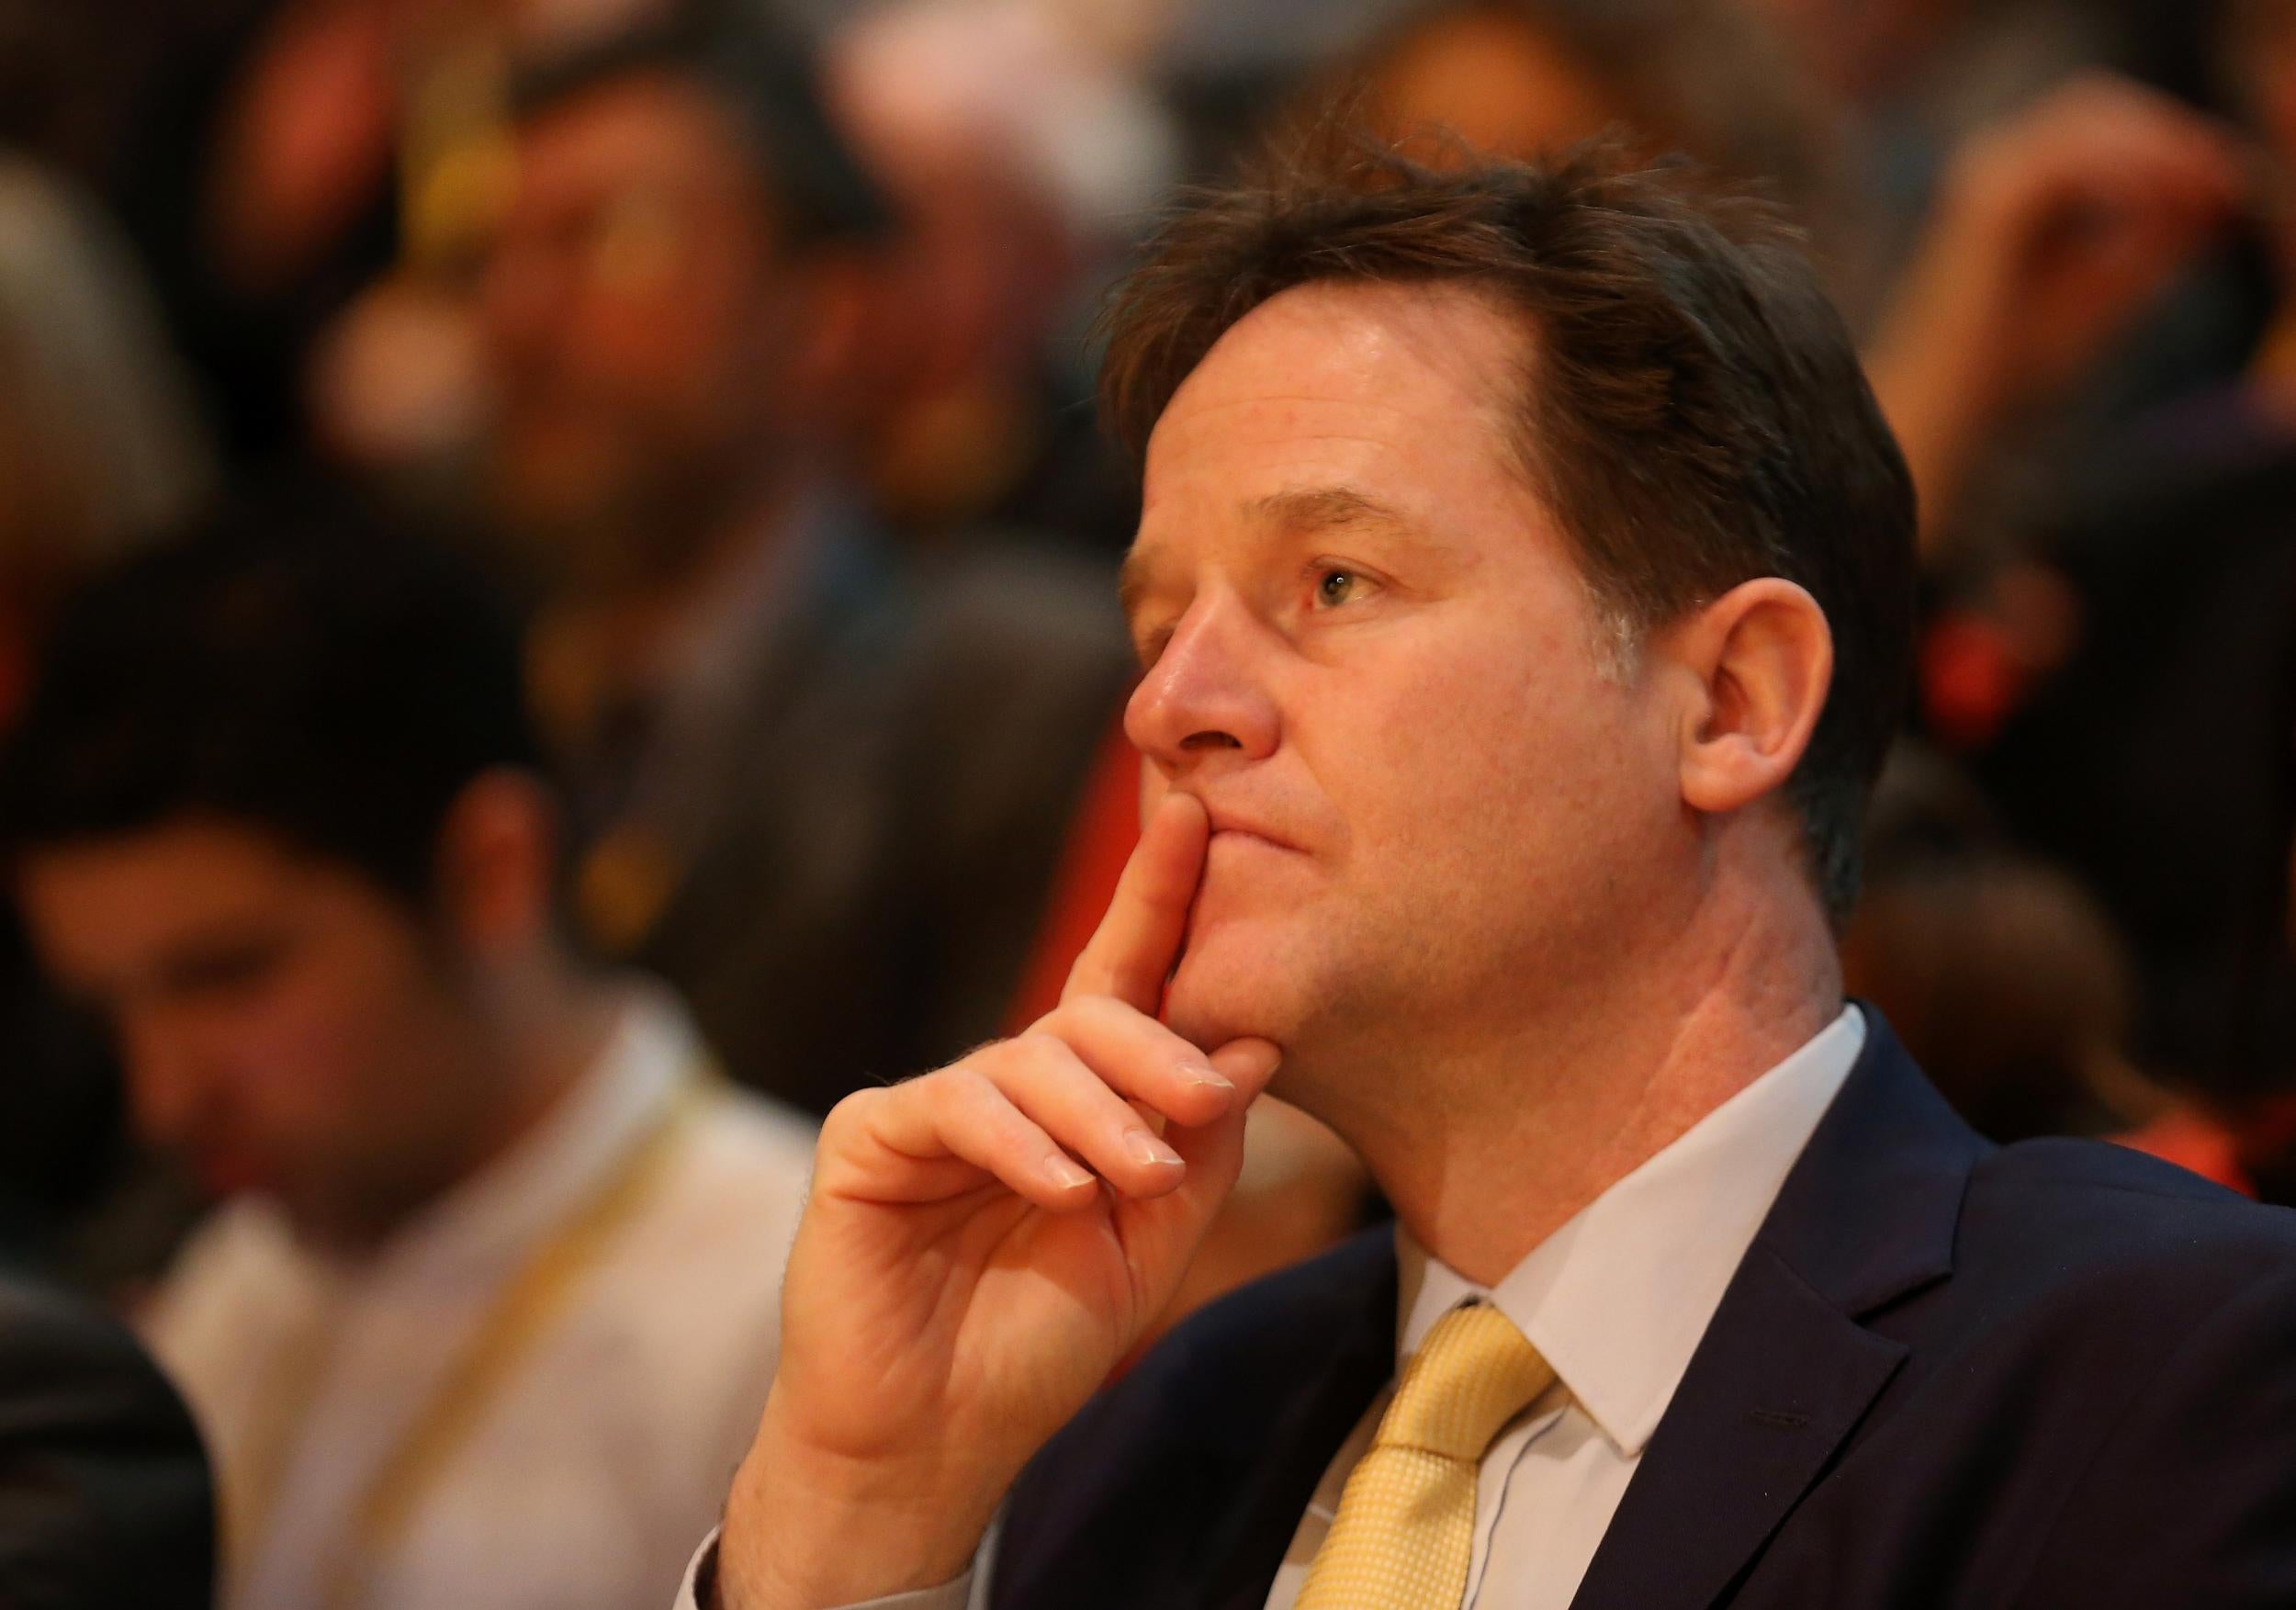 Former Lib Dem leader Nick Cleff is making his first election speech on Tuesday